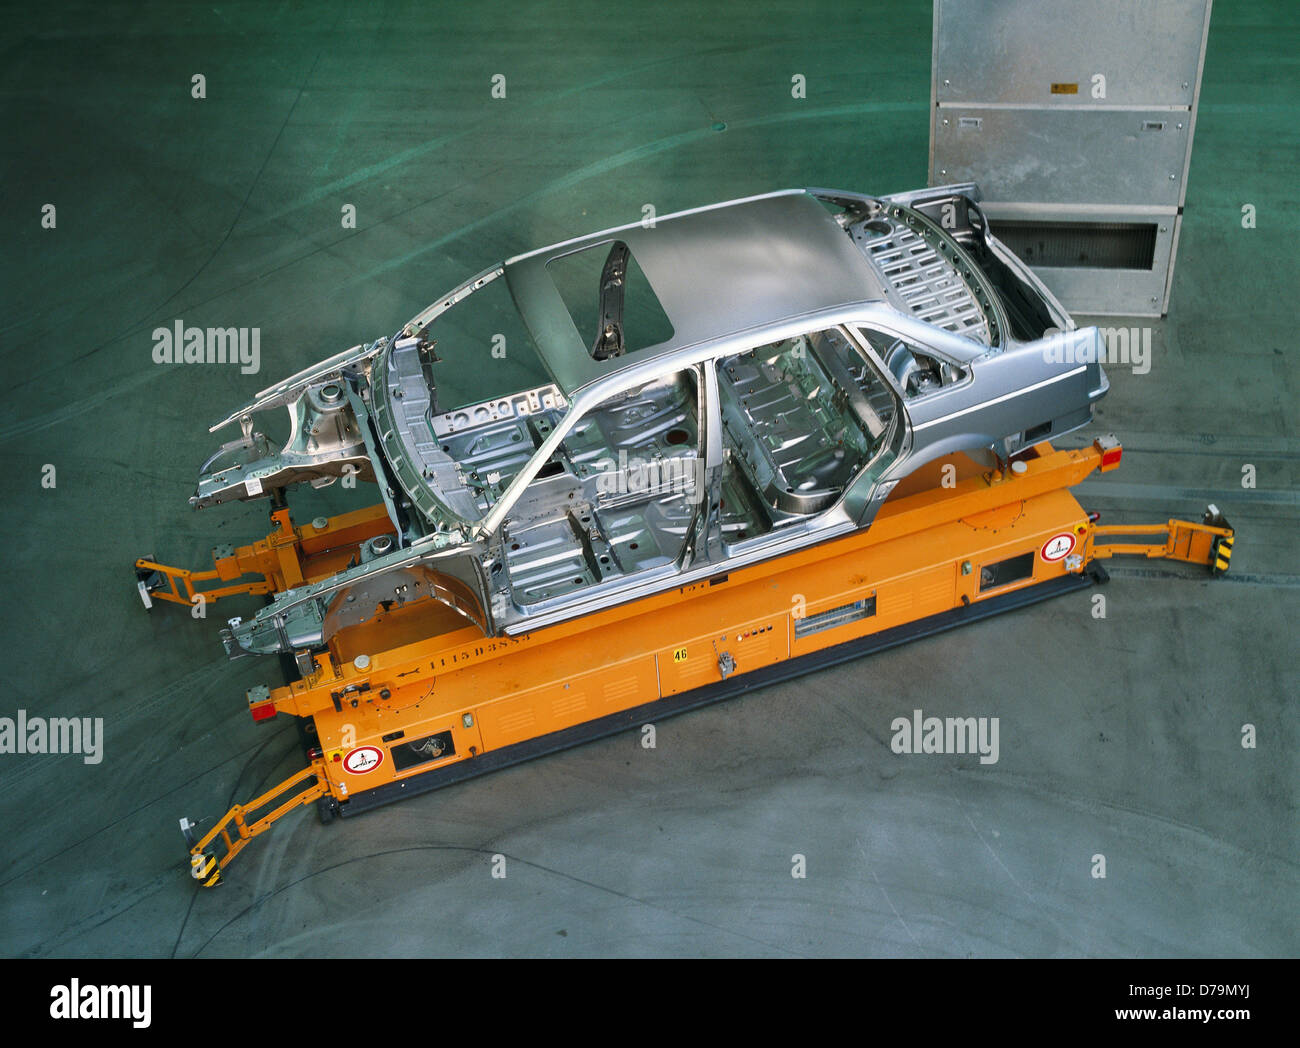 Elevated view car part on automatic guided vehicle Stock Photo